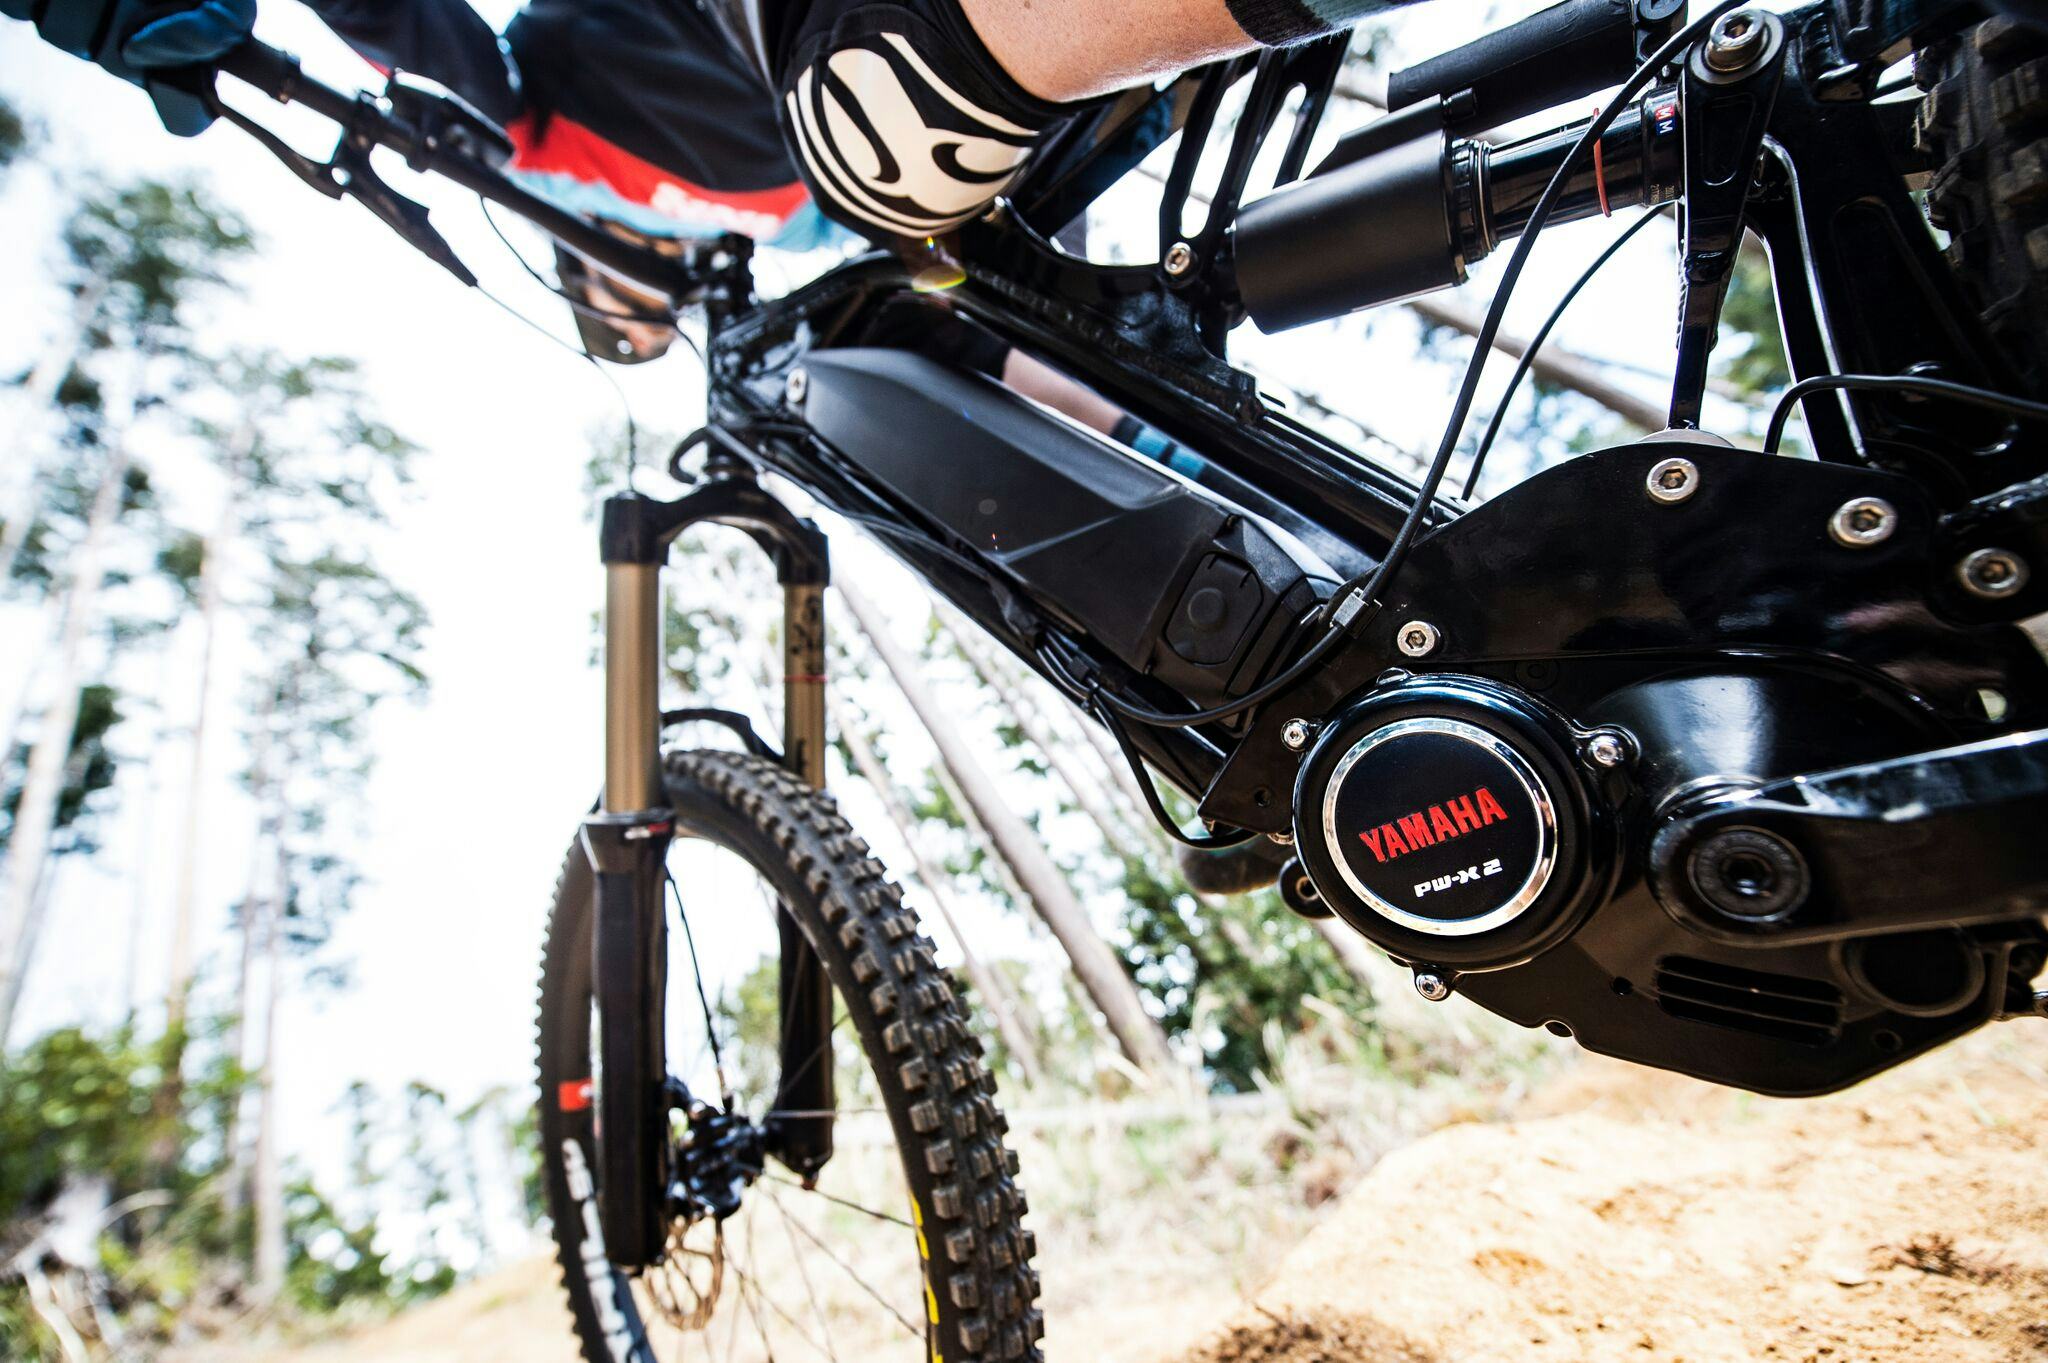 Yamaha’s new top mid-motor PW-X2 for e-MTBs which comes with new support technologies. – Photo Yamaha Motor